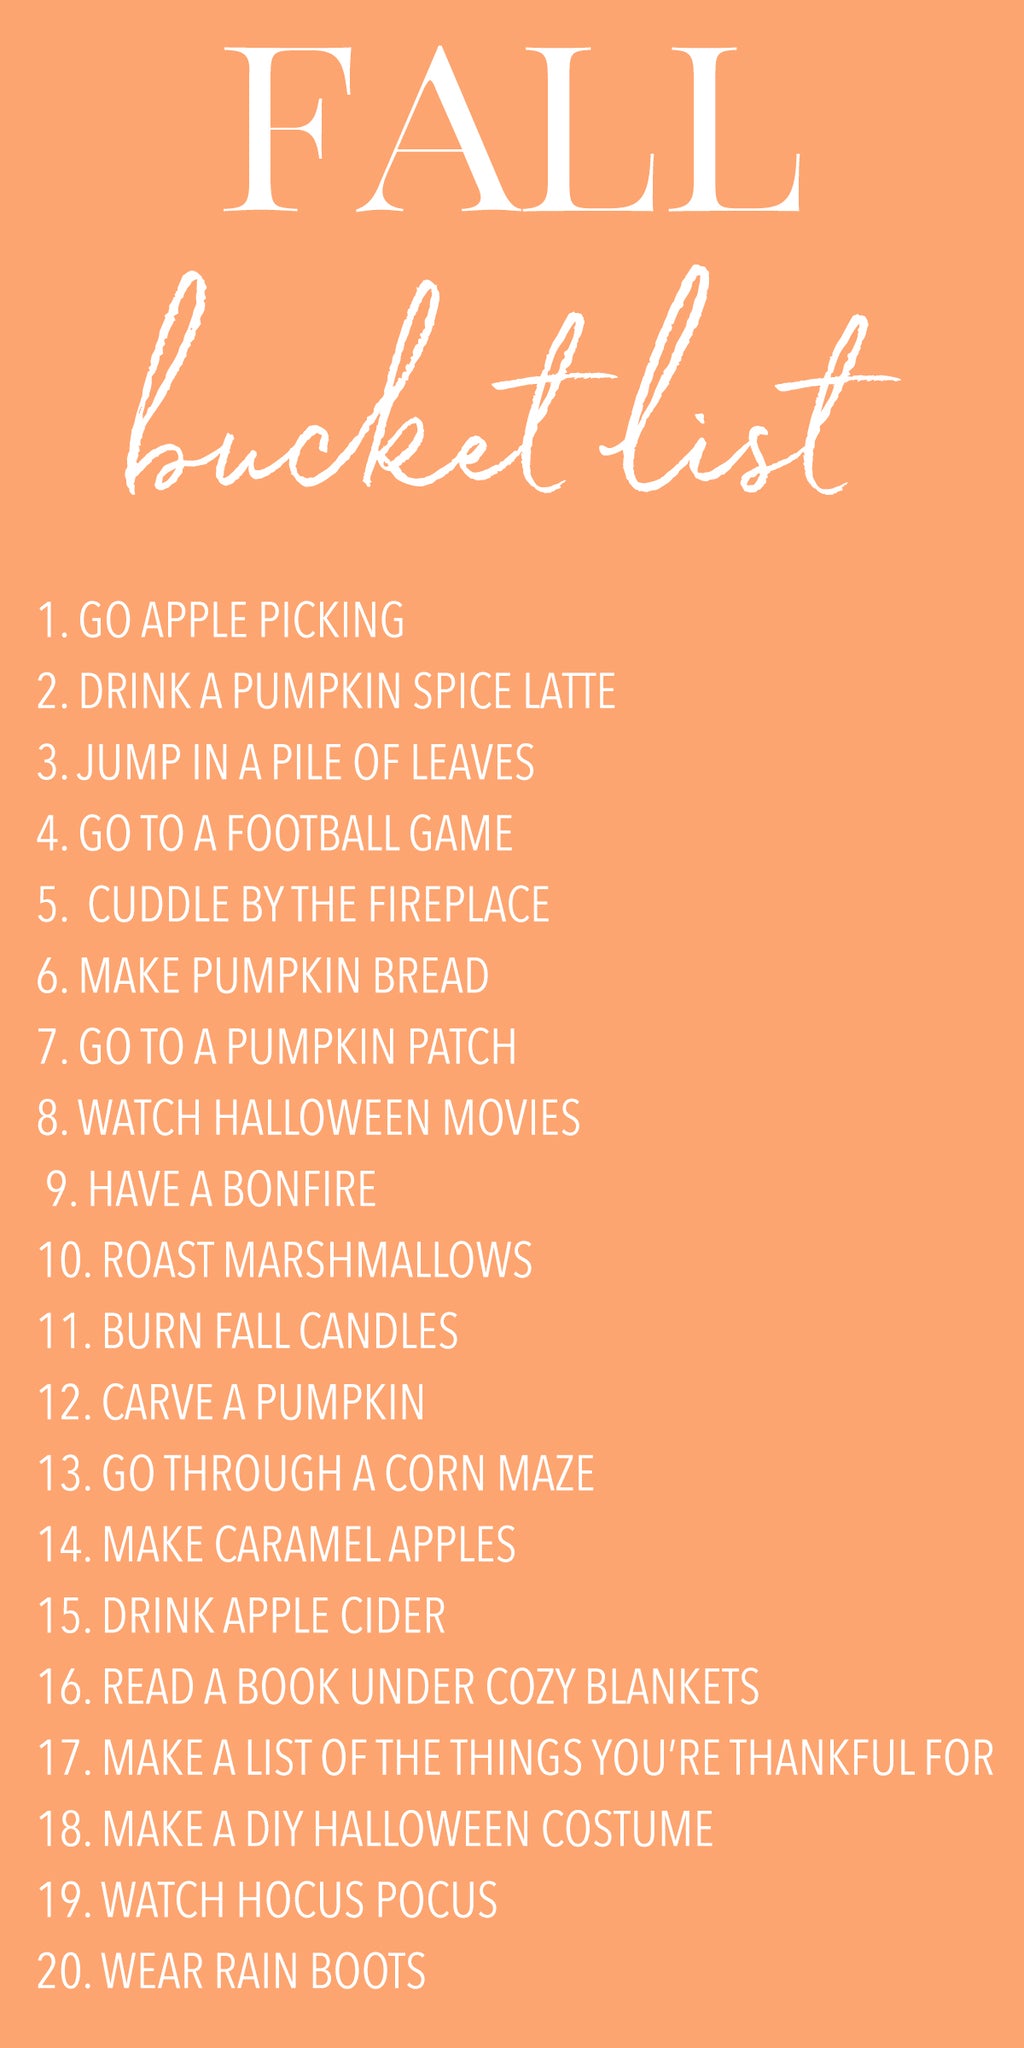 Fall Bucket List - Pretty Collected